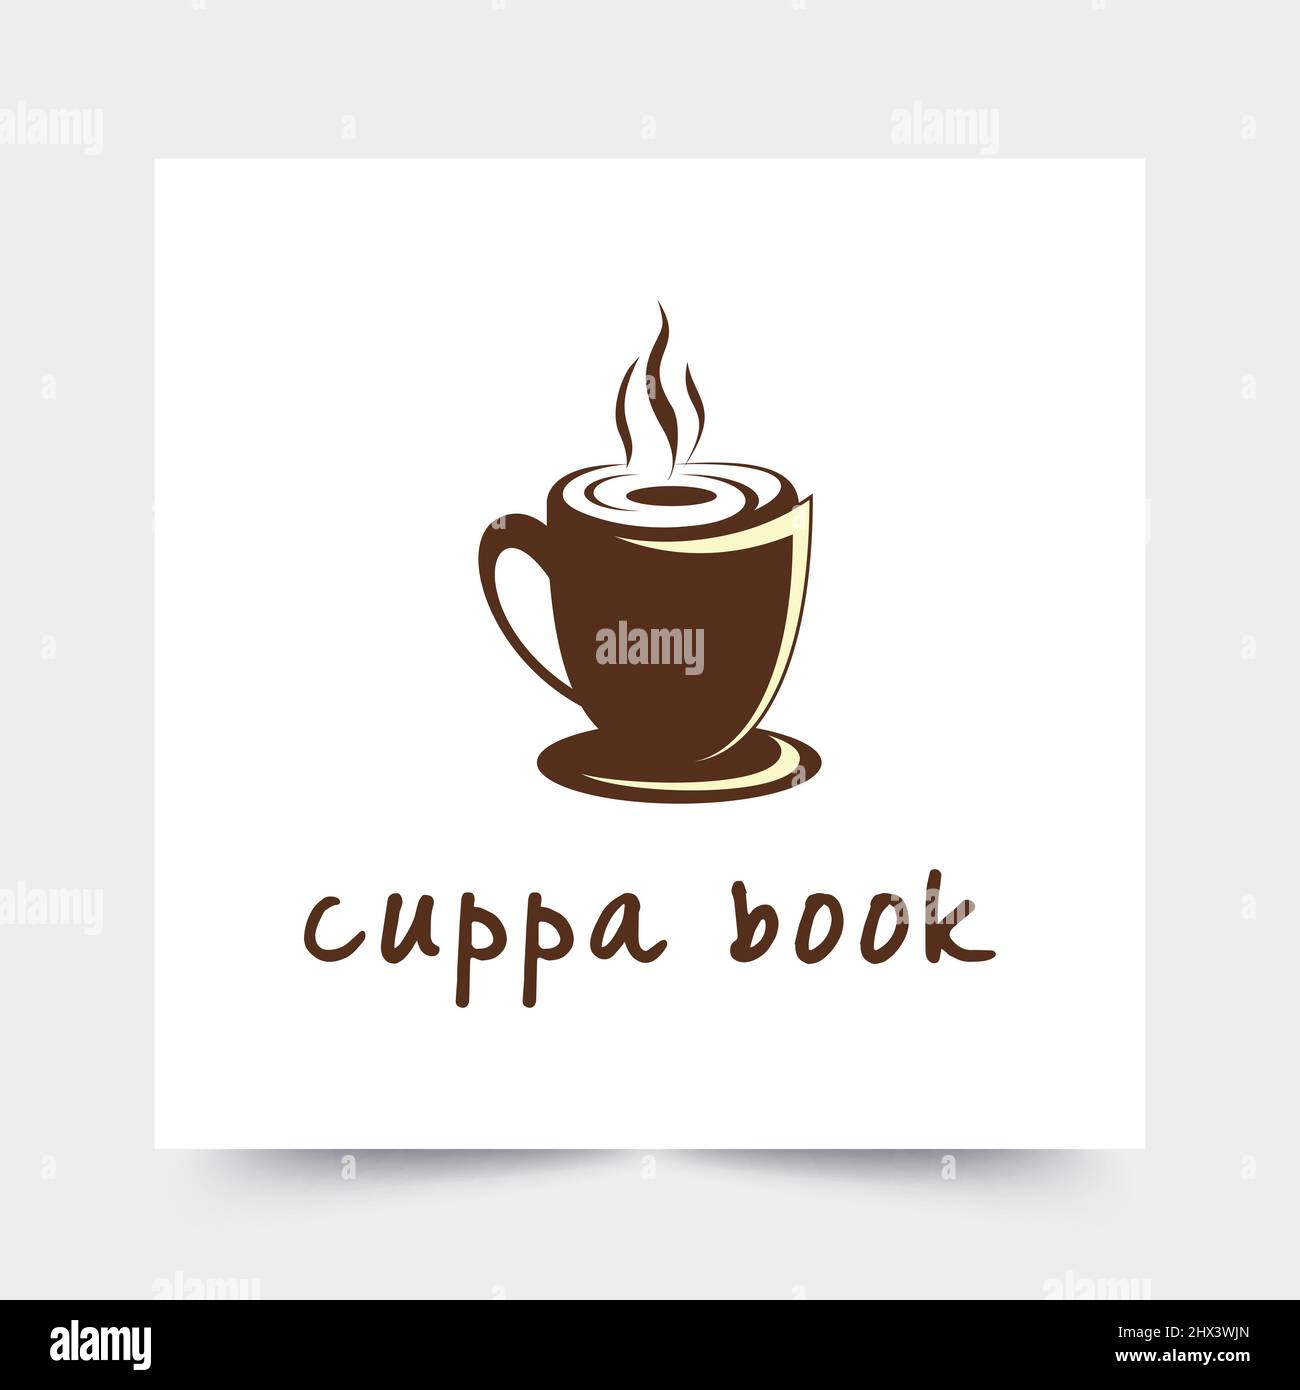 Simple and creative cup and book logo design Stock Vector